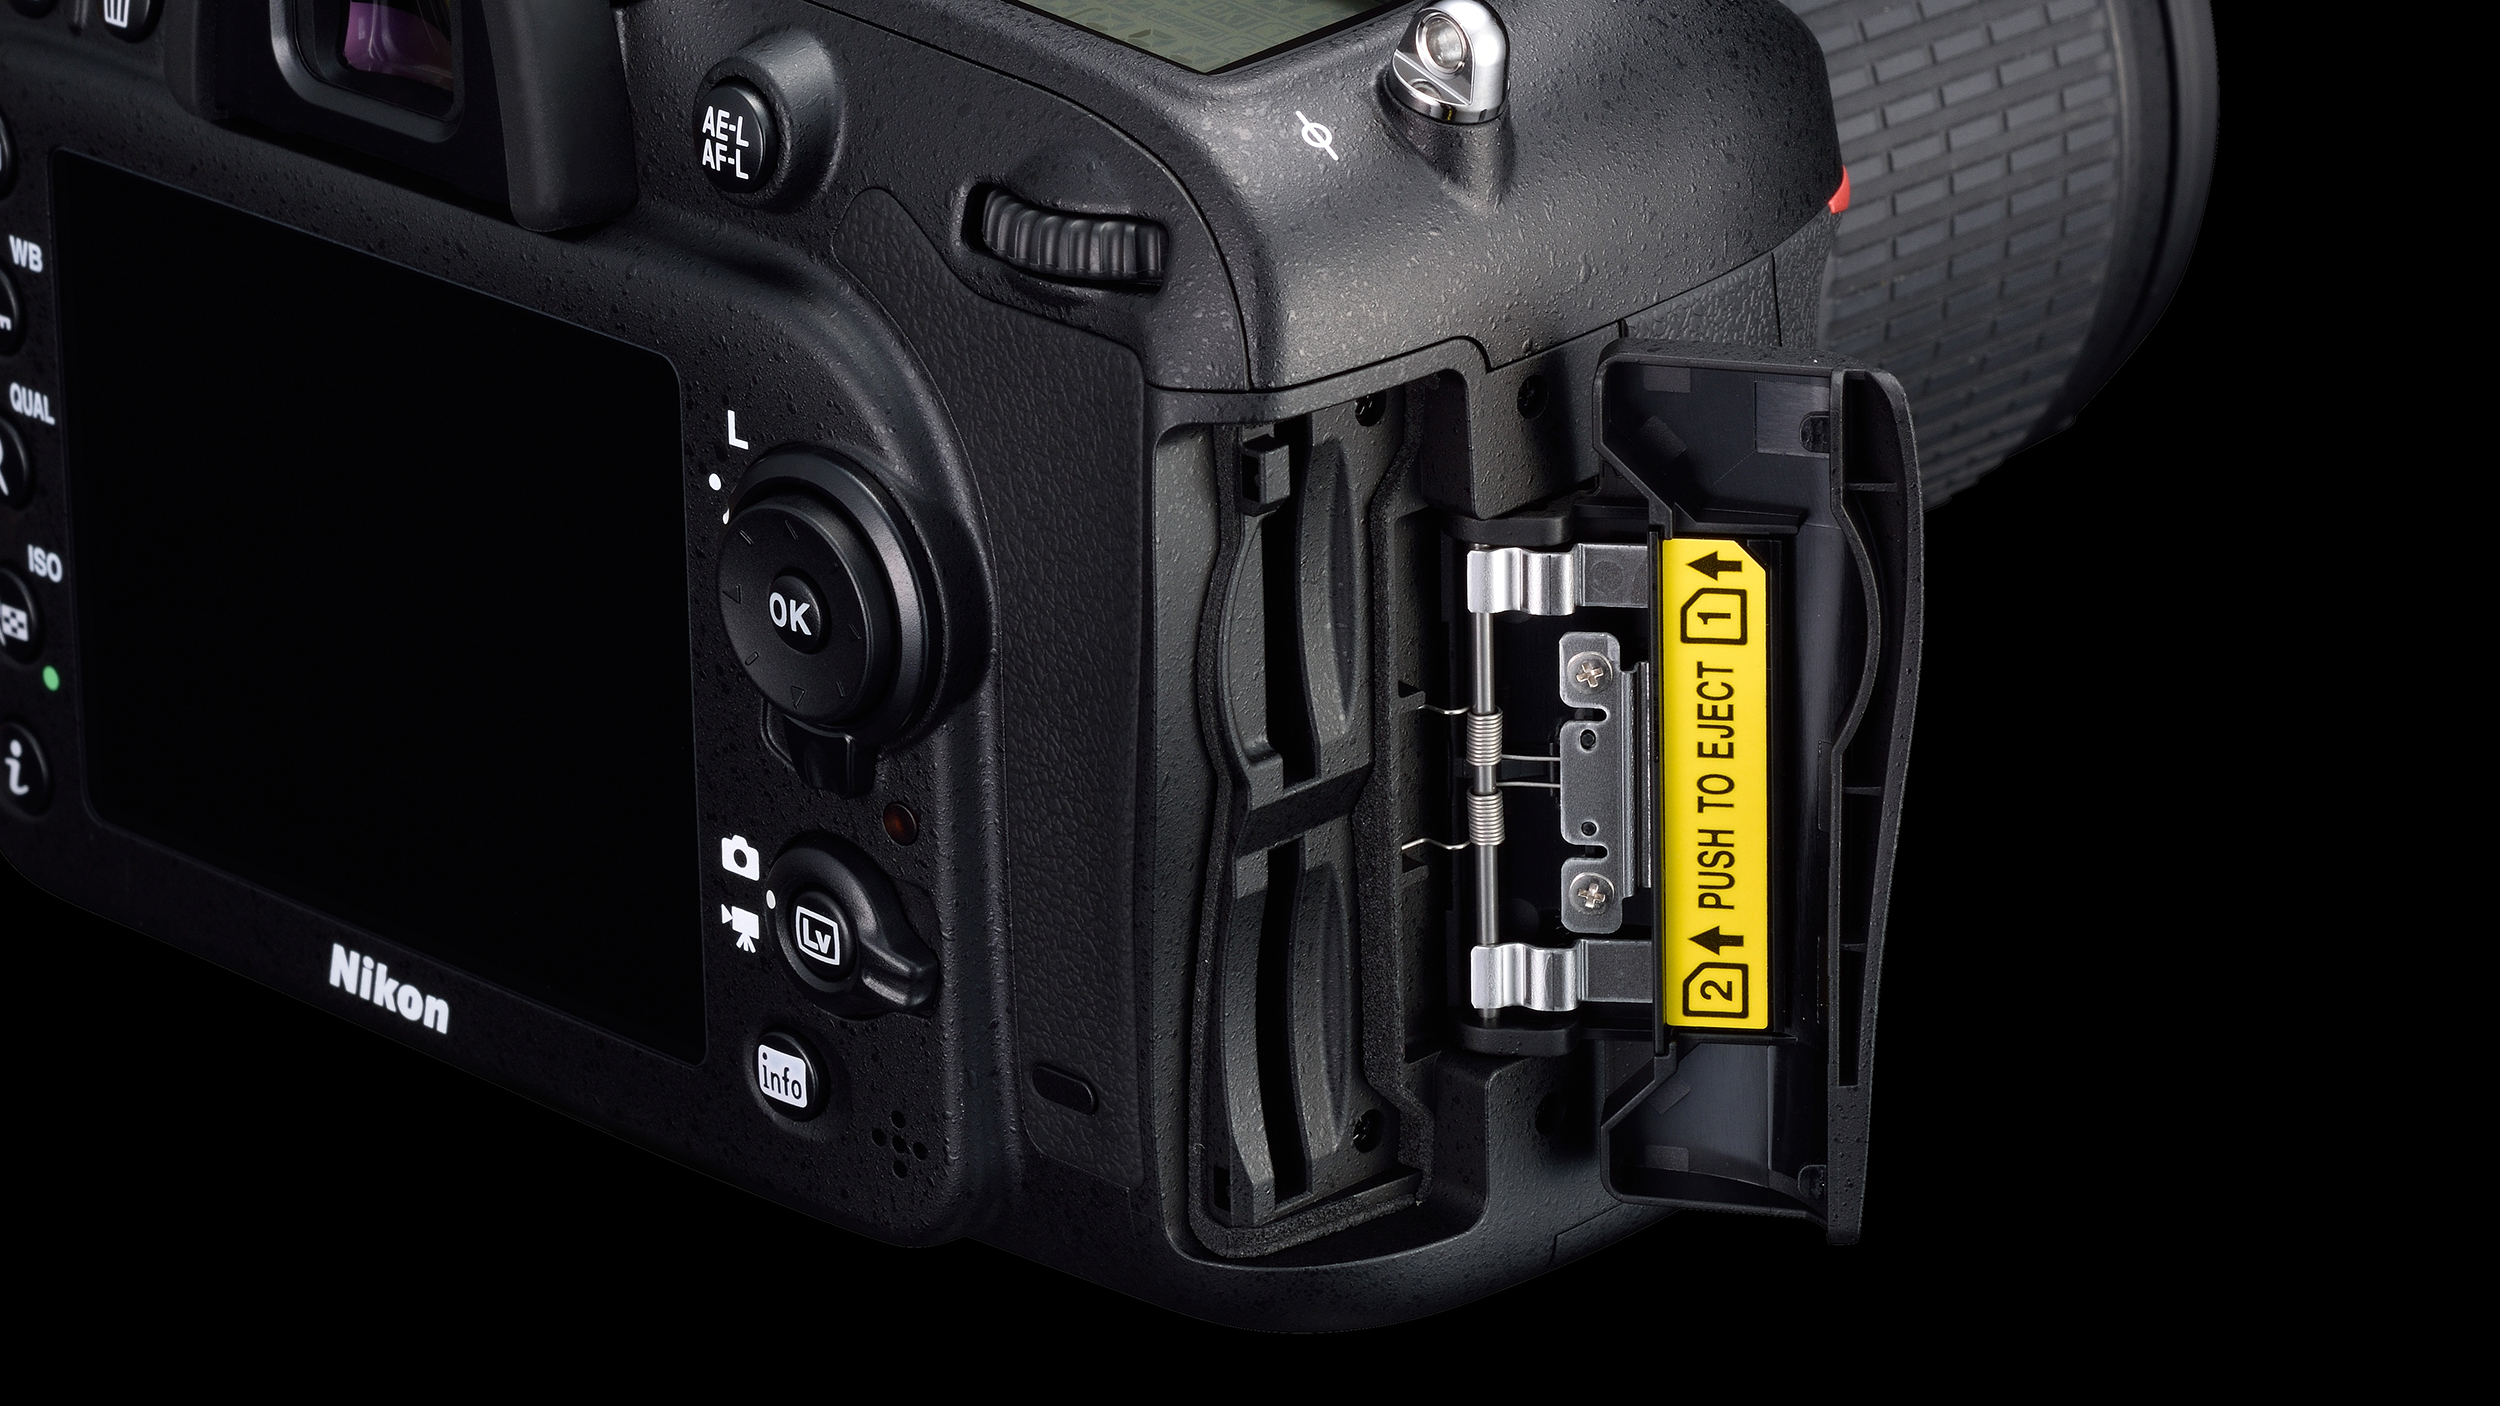 Stuwkracht huurling Rijden Nikon D7500 vs D7200: 8 key differences you need to know - The Courier